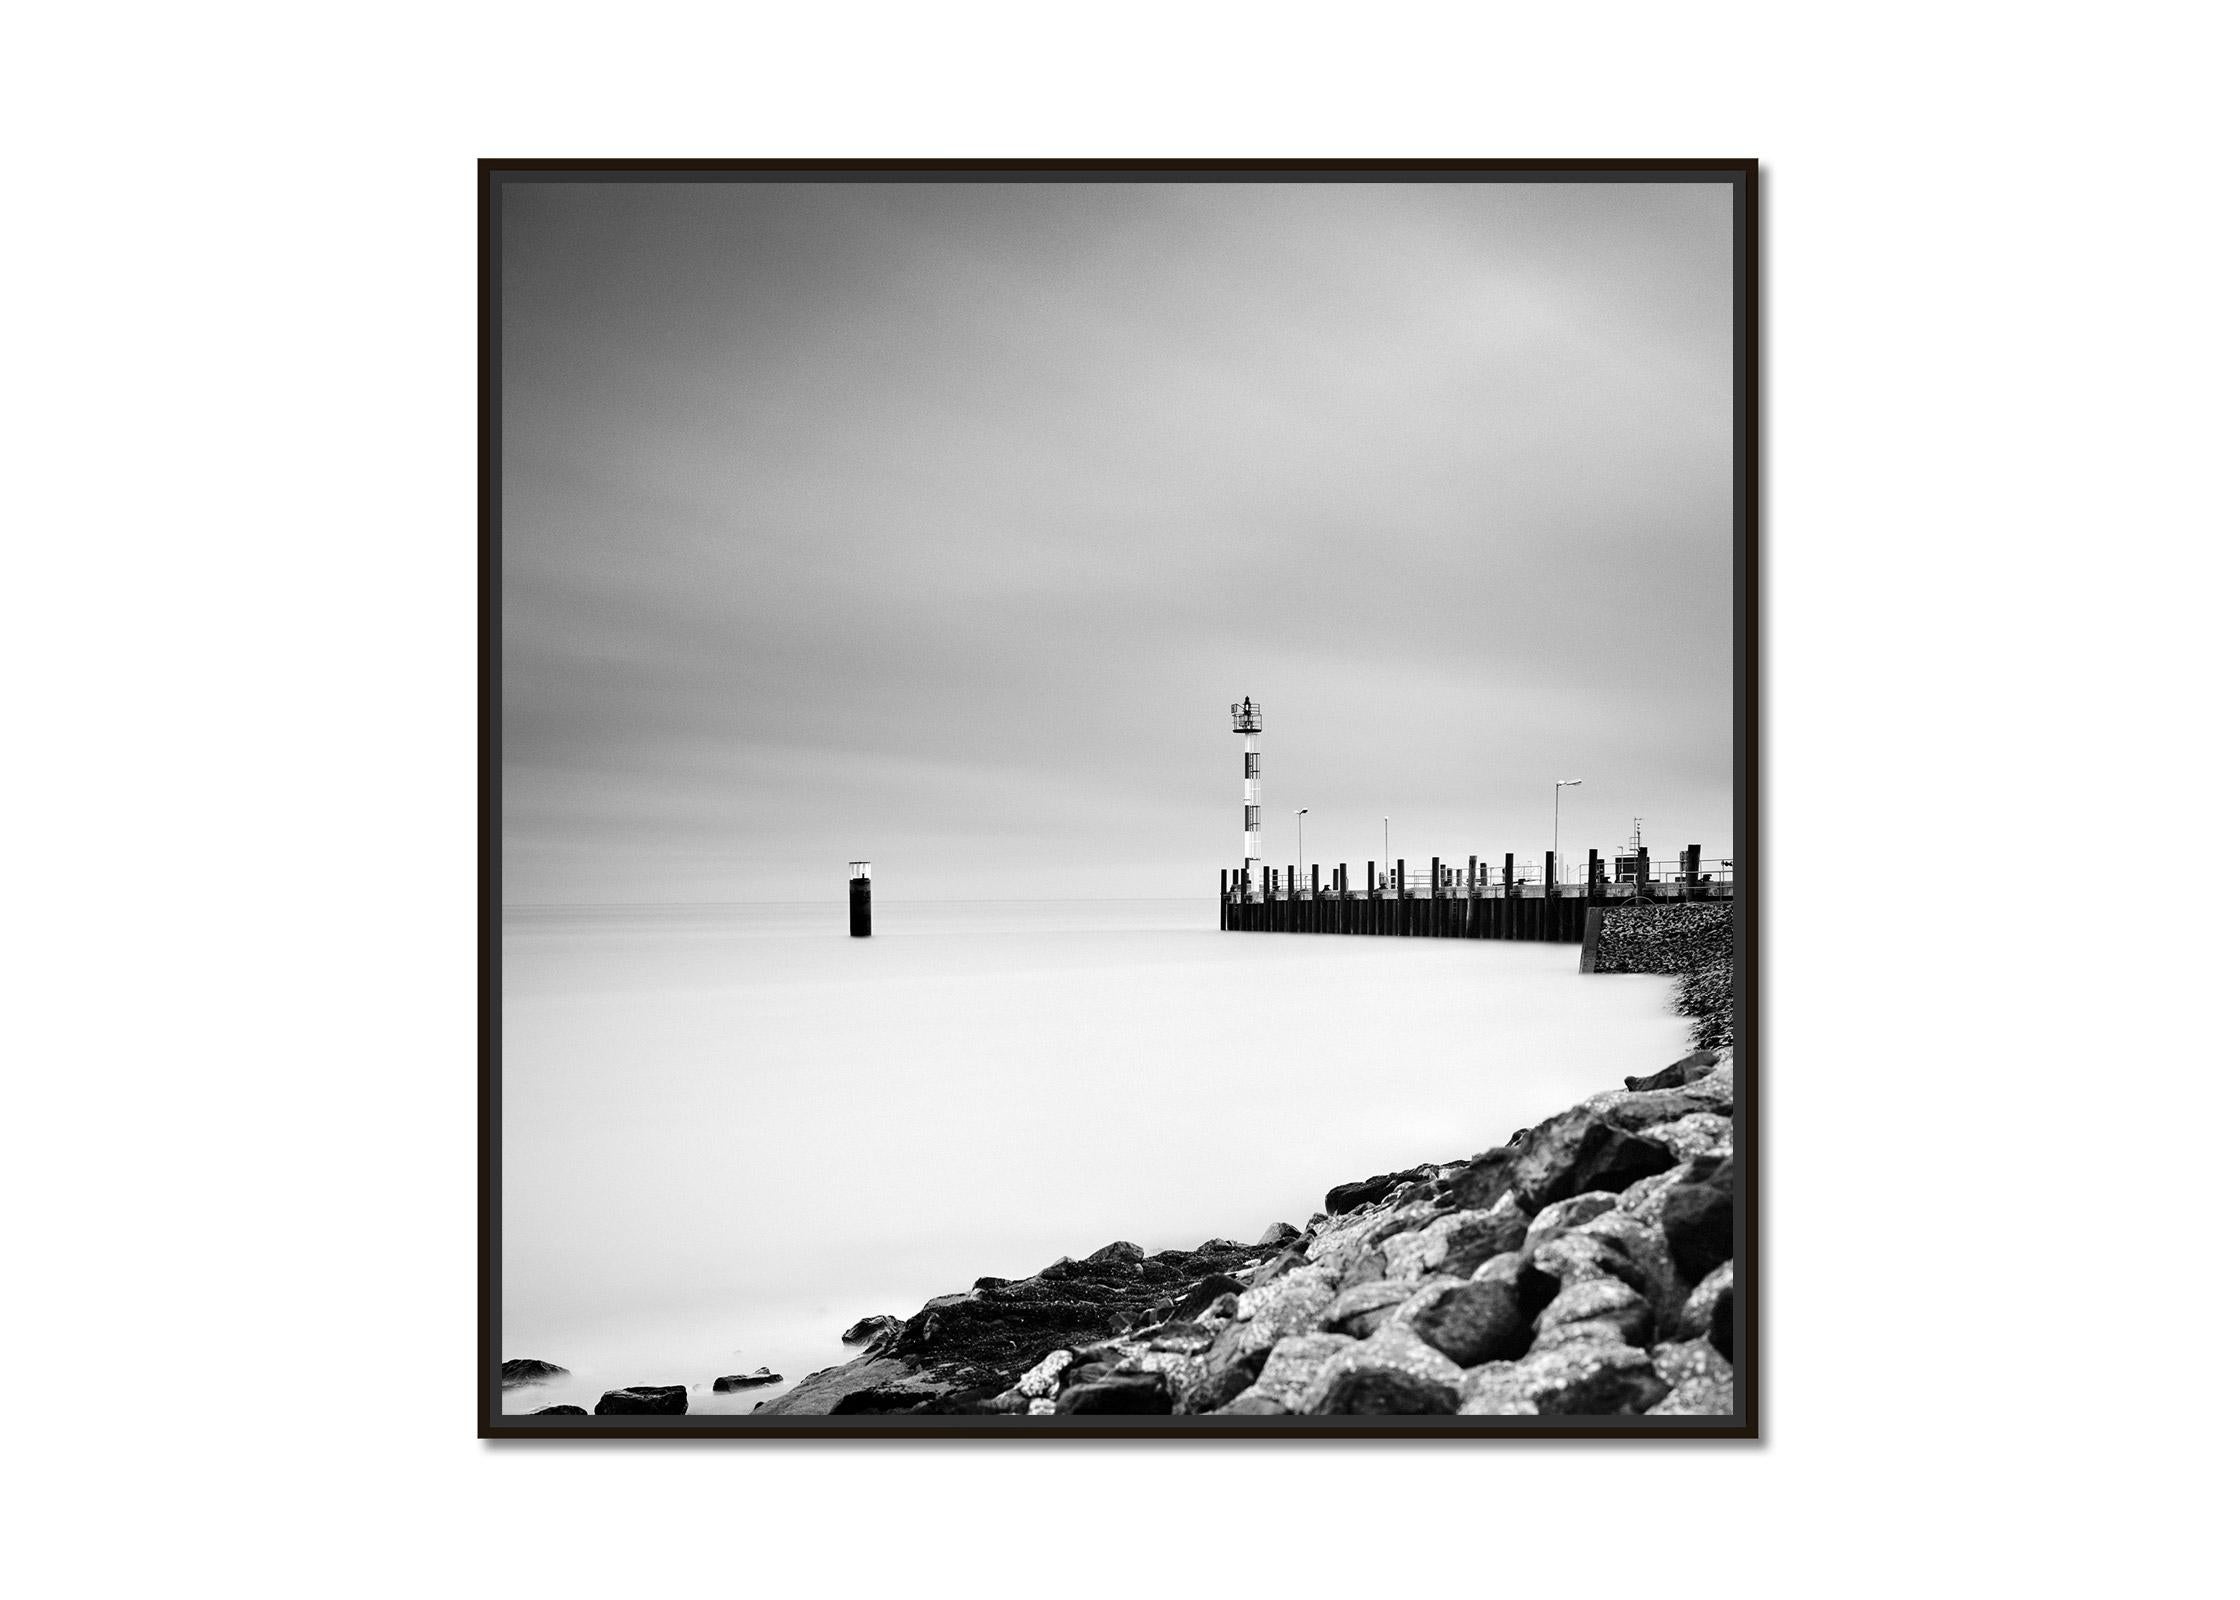 Port List, Sylt, North Sea, Germany, black and white photography, landscape - Photograph by Gerald Berghammer